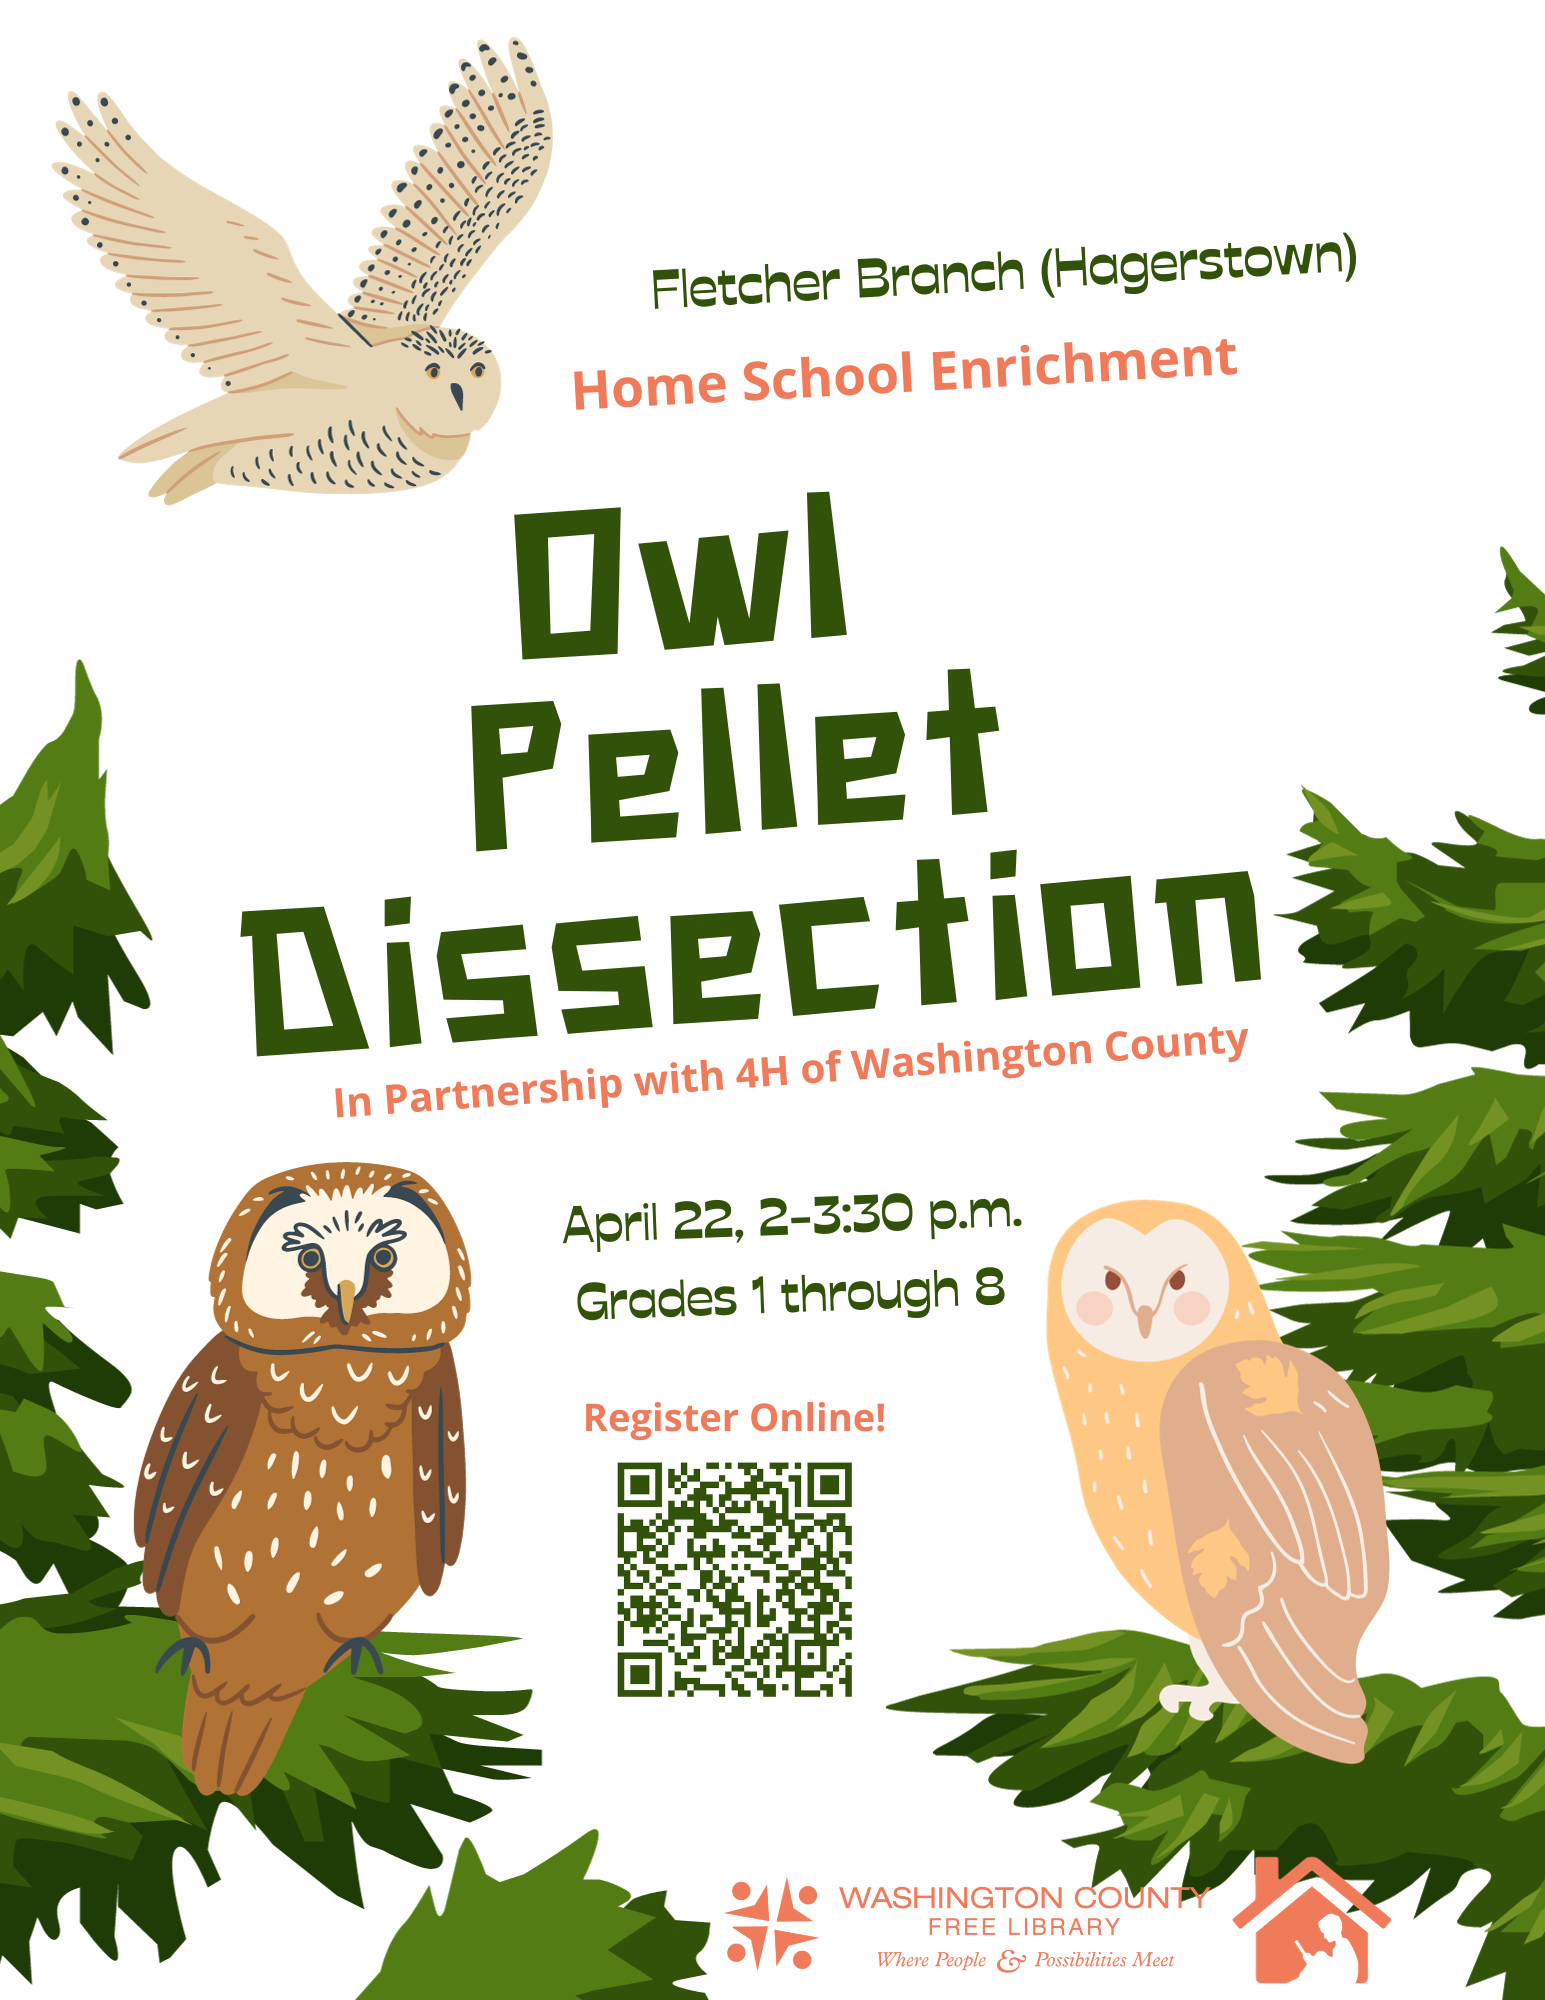 Owls swoop in from the corners of the page and settle among evergreen branches in the lower left and right corners, staring down the viewer. The flyer reads: "Fletcher Branch (Hagerstown) Home School Enrichment Class: Owl Pellet Dissection, in Partnership with 4H of Washington County. April 22nd, 2-3:30 pm, Grades 1 through 8. Register online!" There is a QR code to scan and register for the class. 